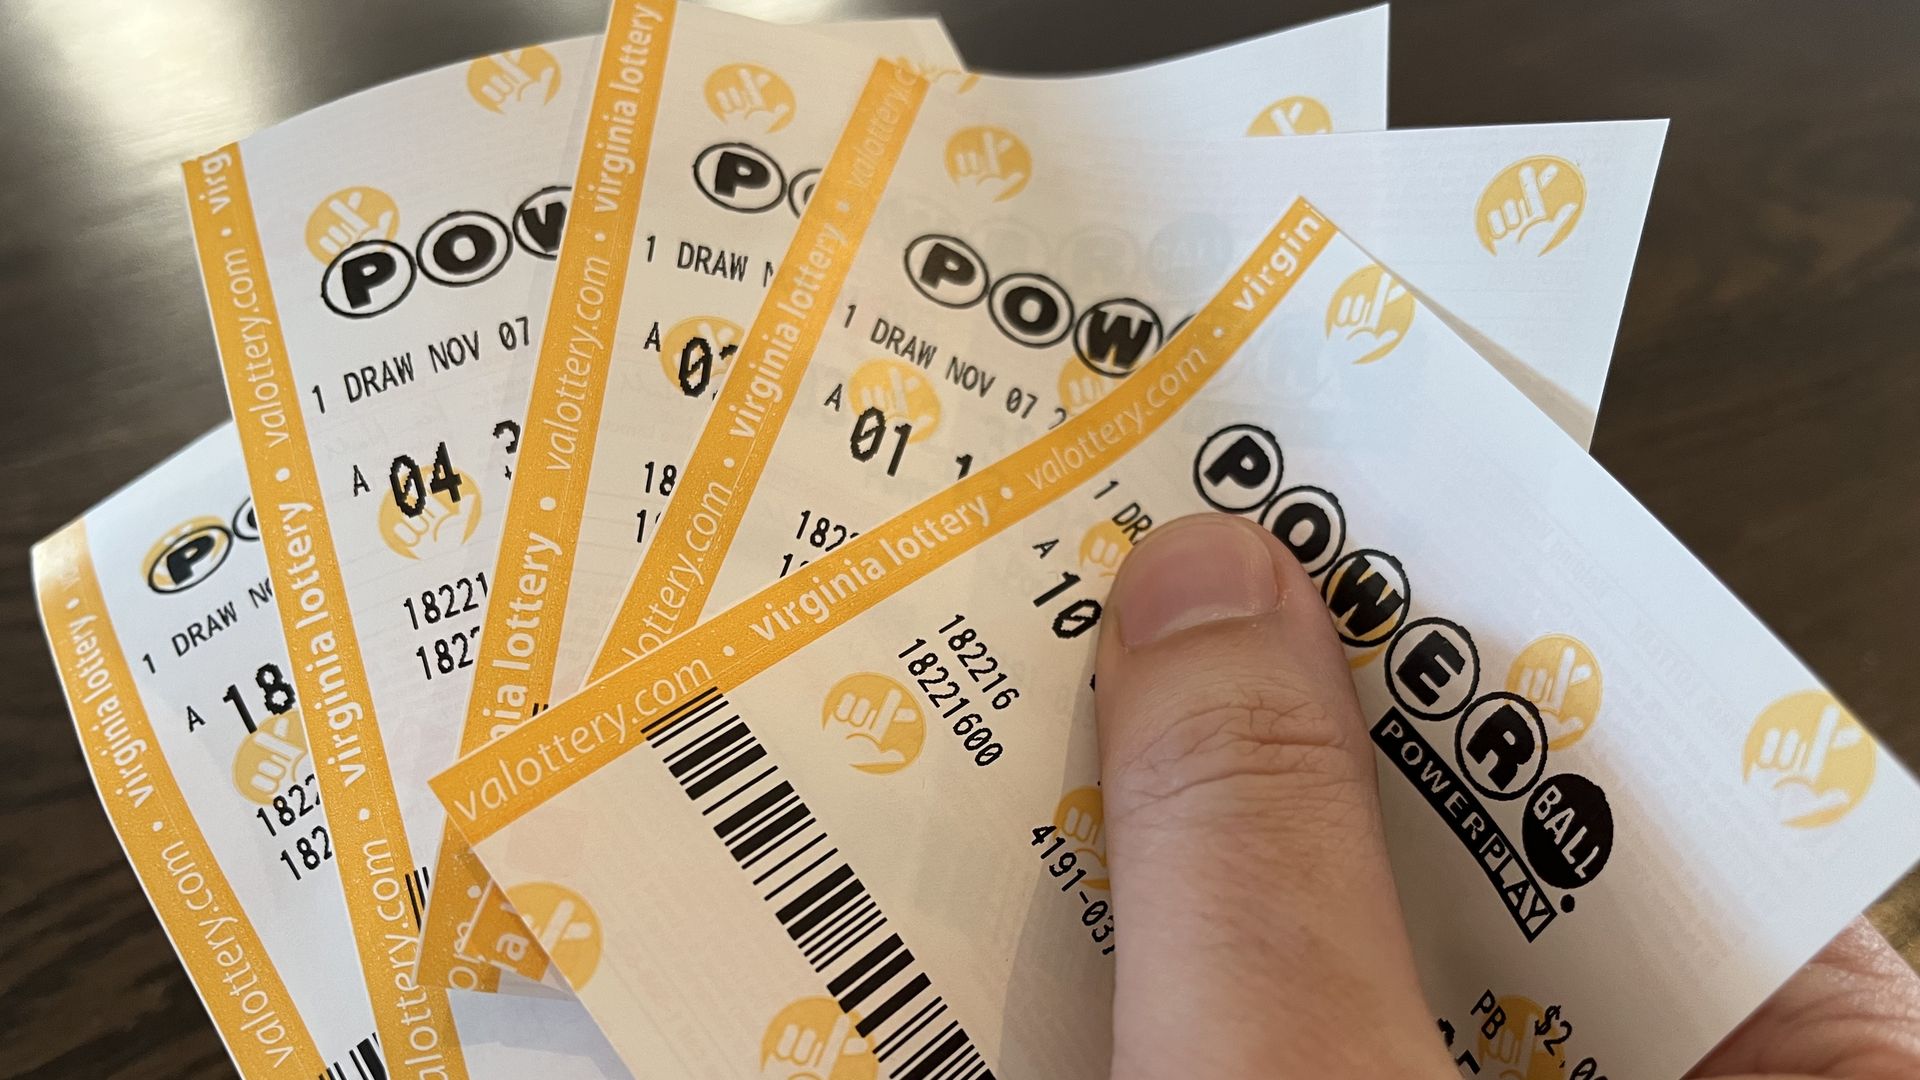 matching numbers on powerball